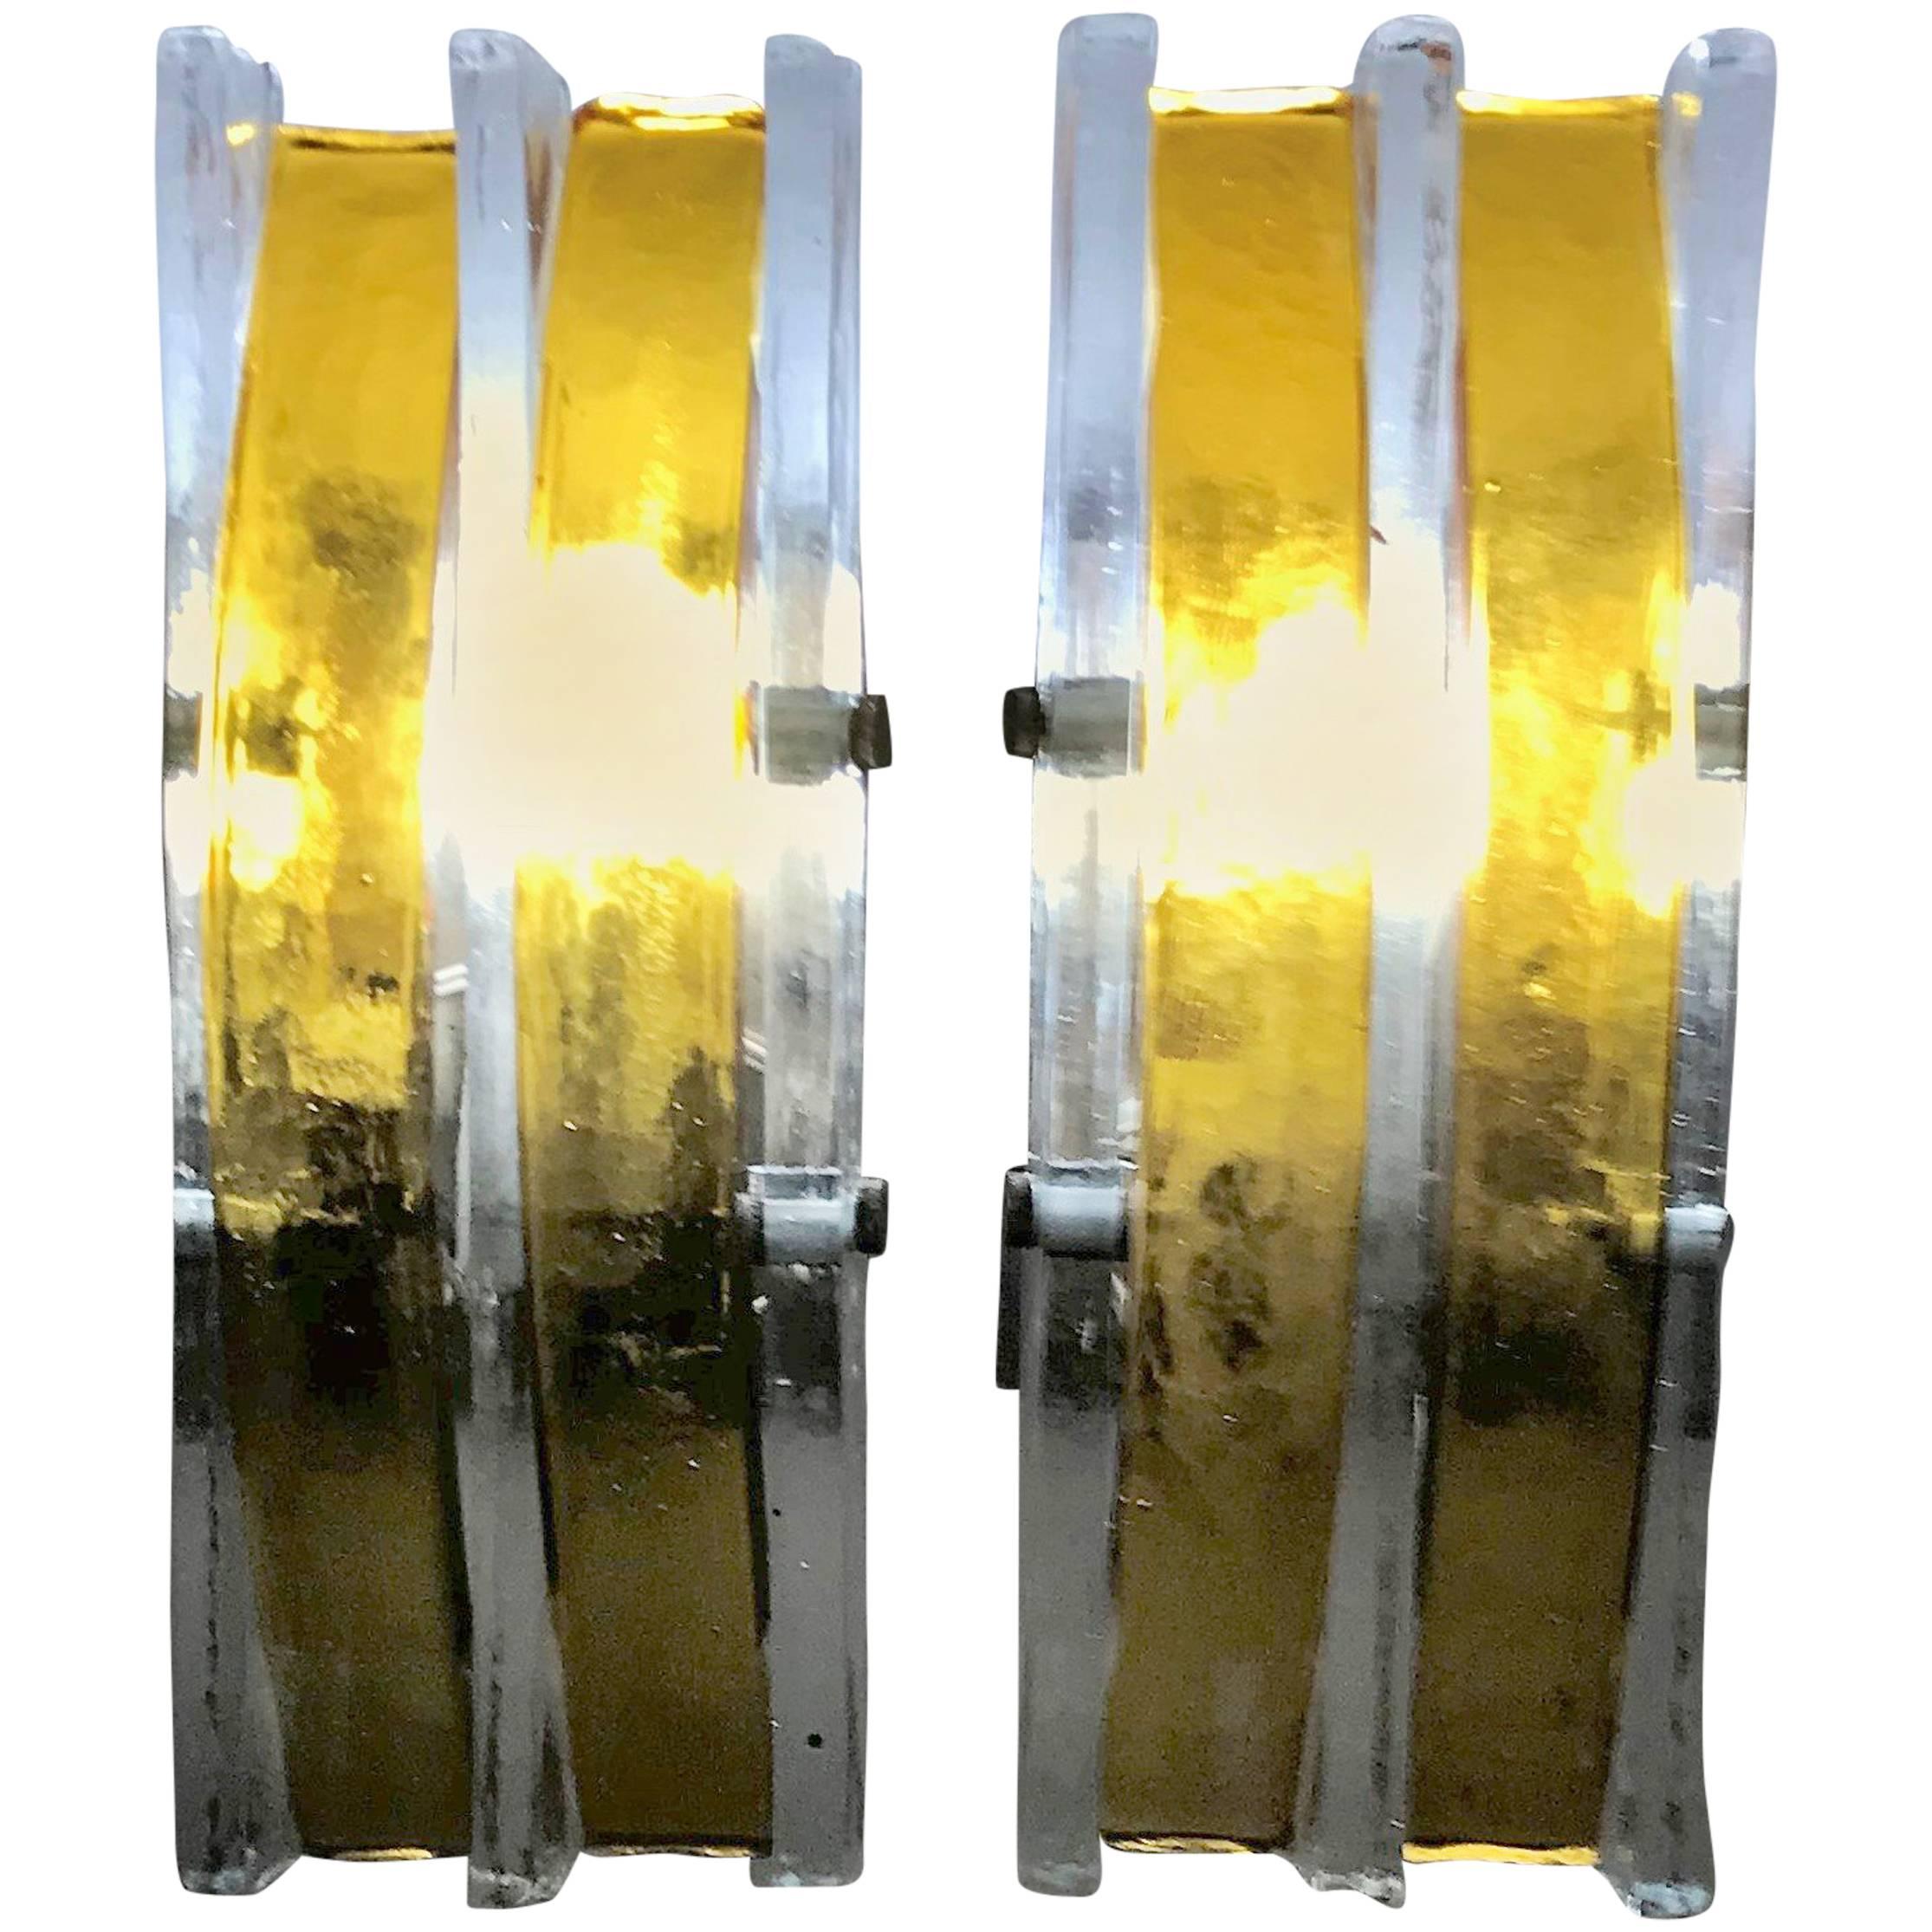 Pair of Mid-Century Modern Sconces in Murano Glass Attributed to Poliarte